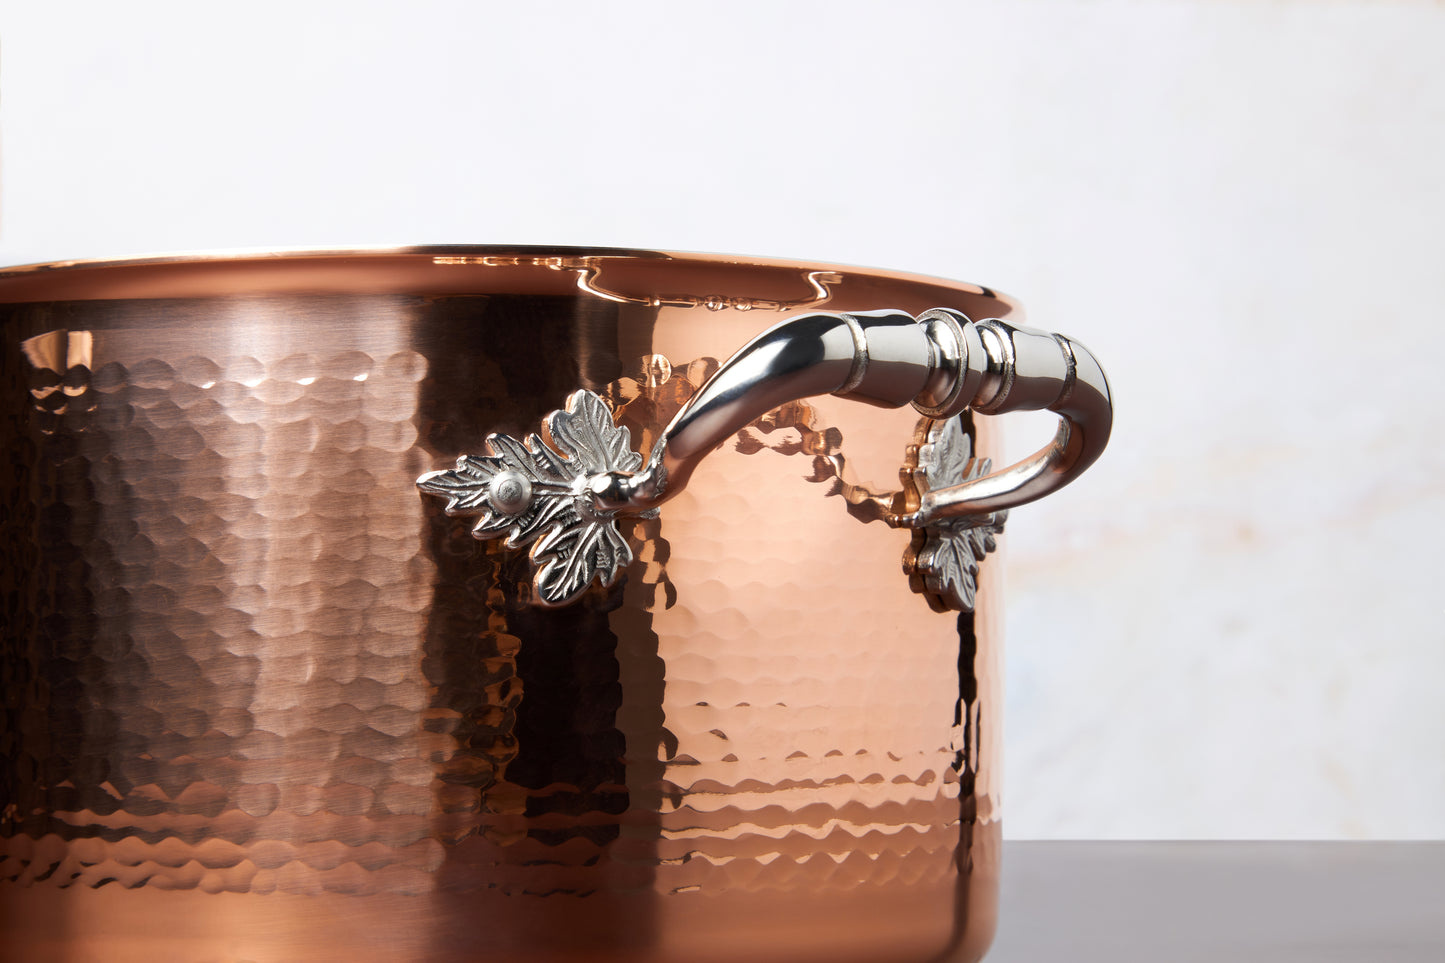 Beautiful stainless steel helper handle decorated with delicate leaves on Opus Cupra cookware by Ruffoni